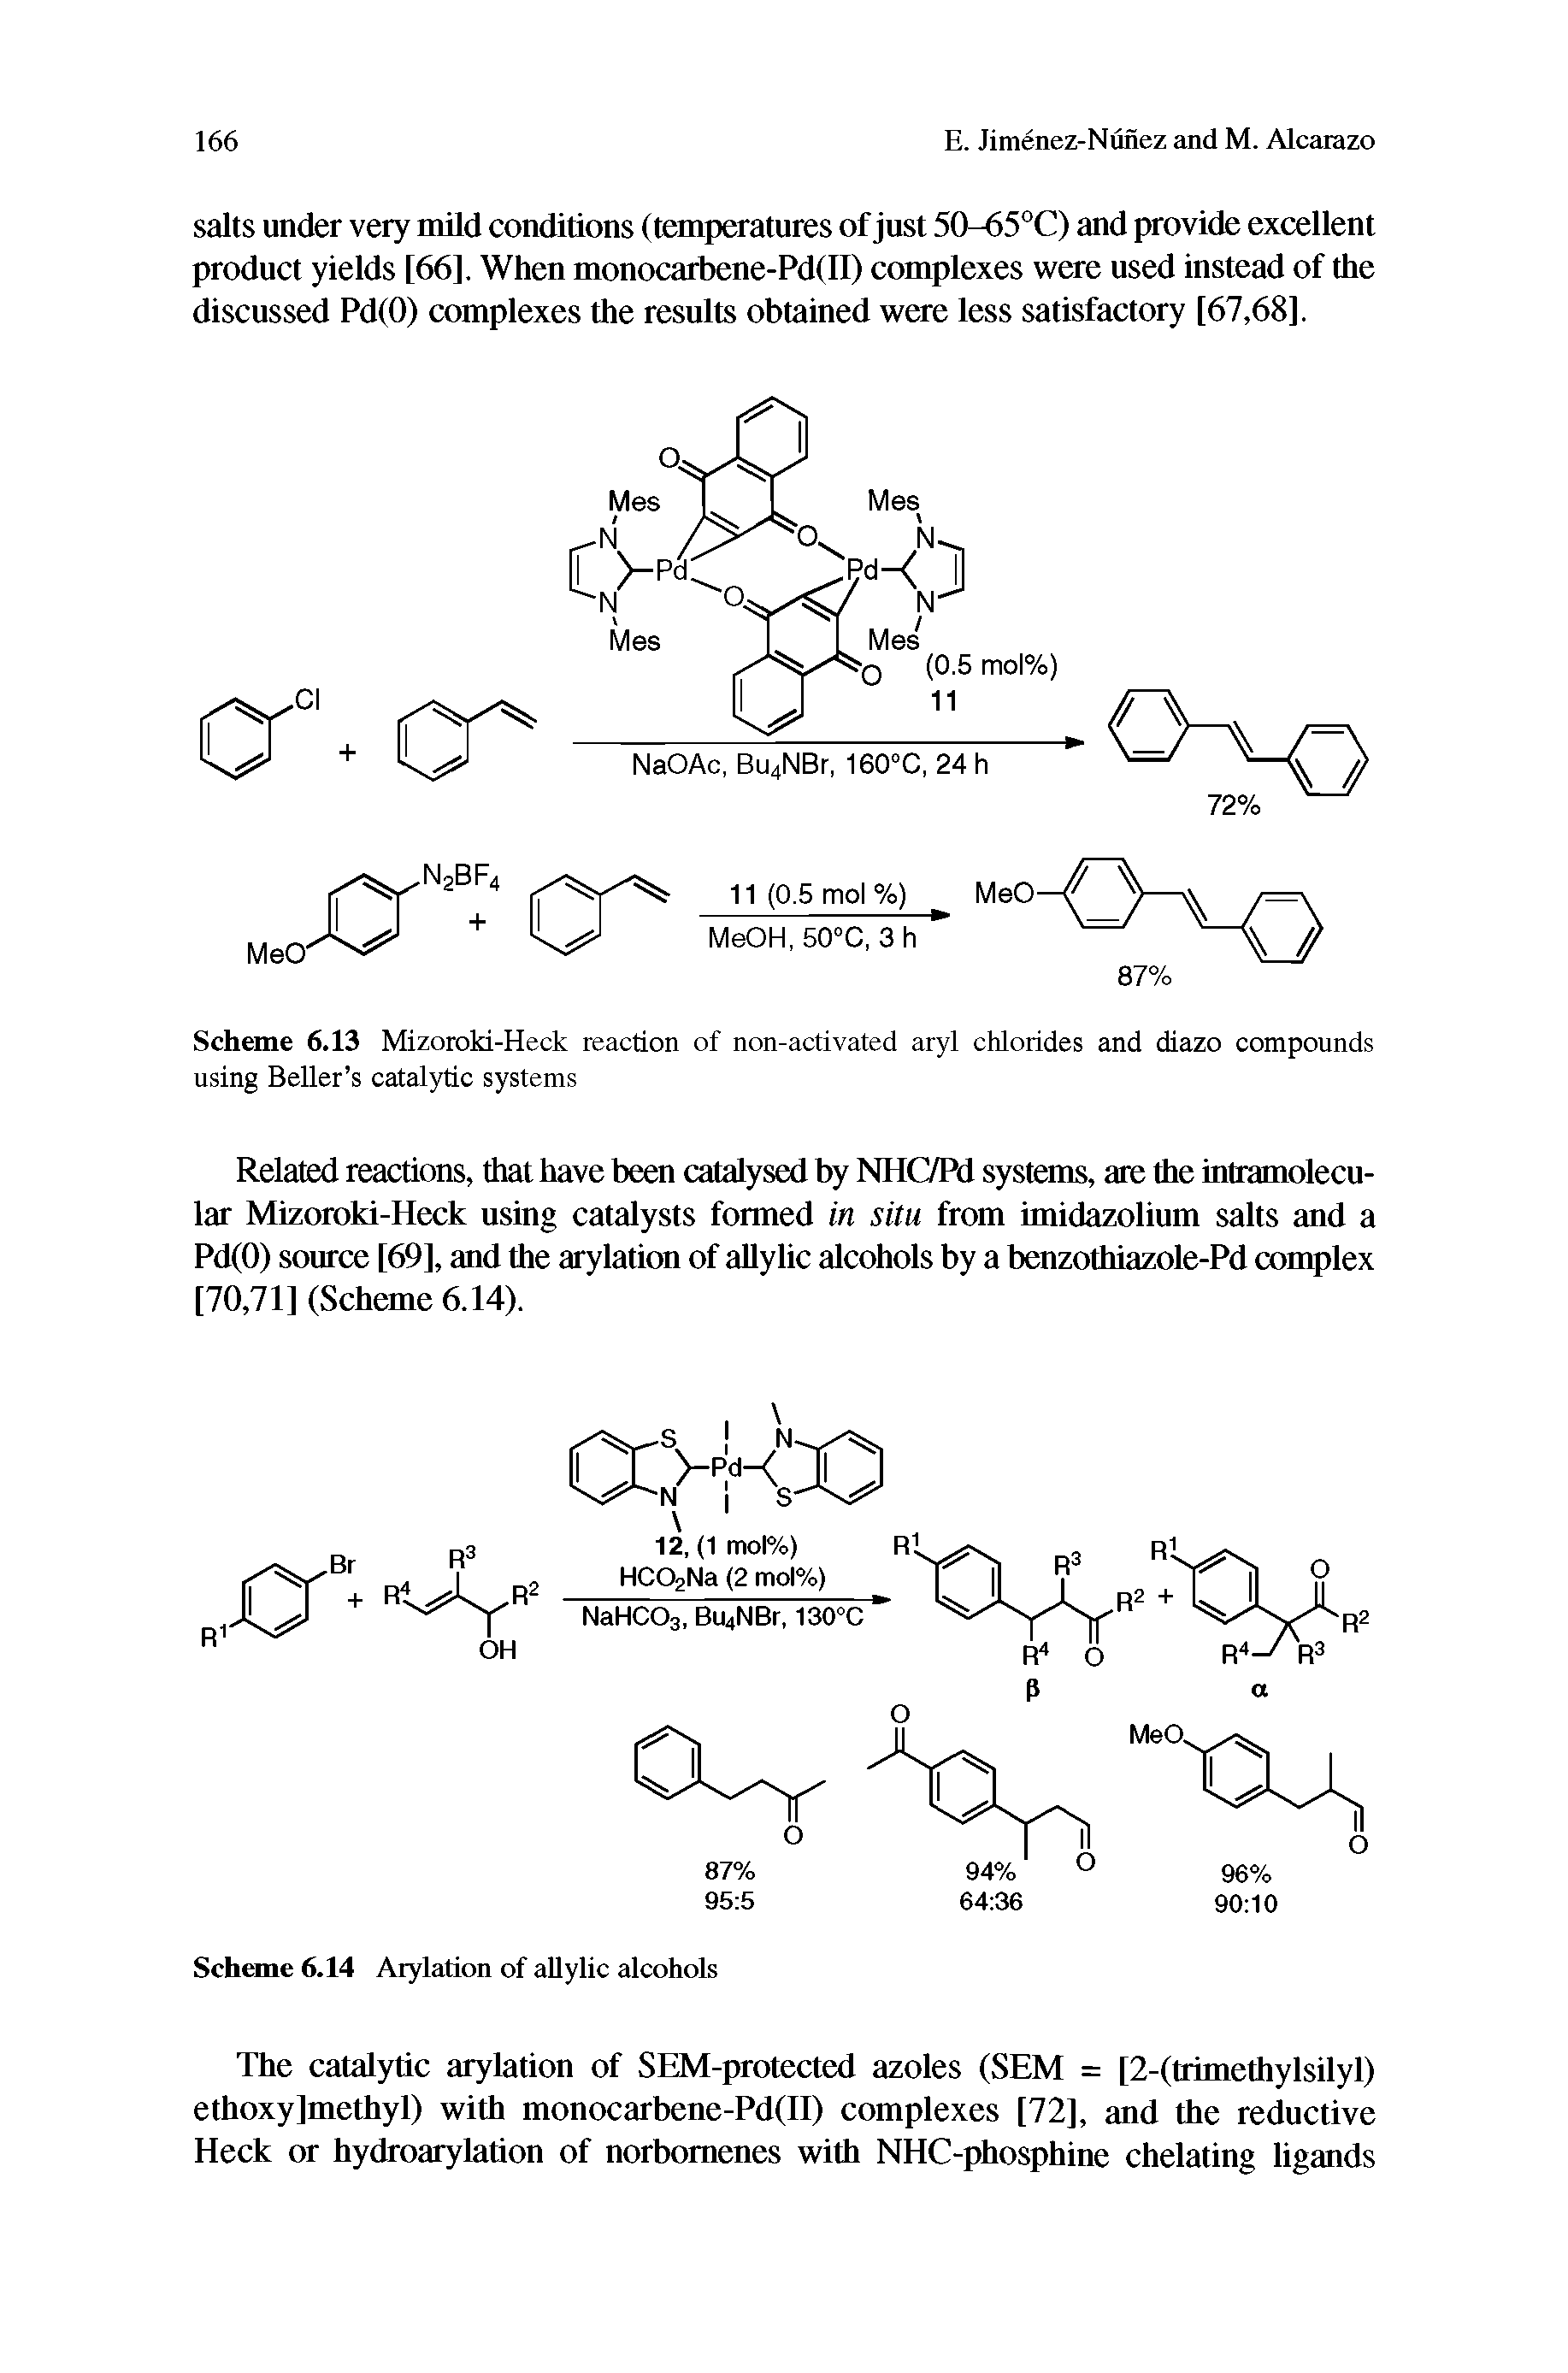 Scheme 6.13 Mizoroki-Heck reaction of non-activated aryl chlorides and diazo compounds using Seller s catalytic systems...